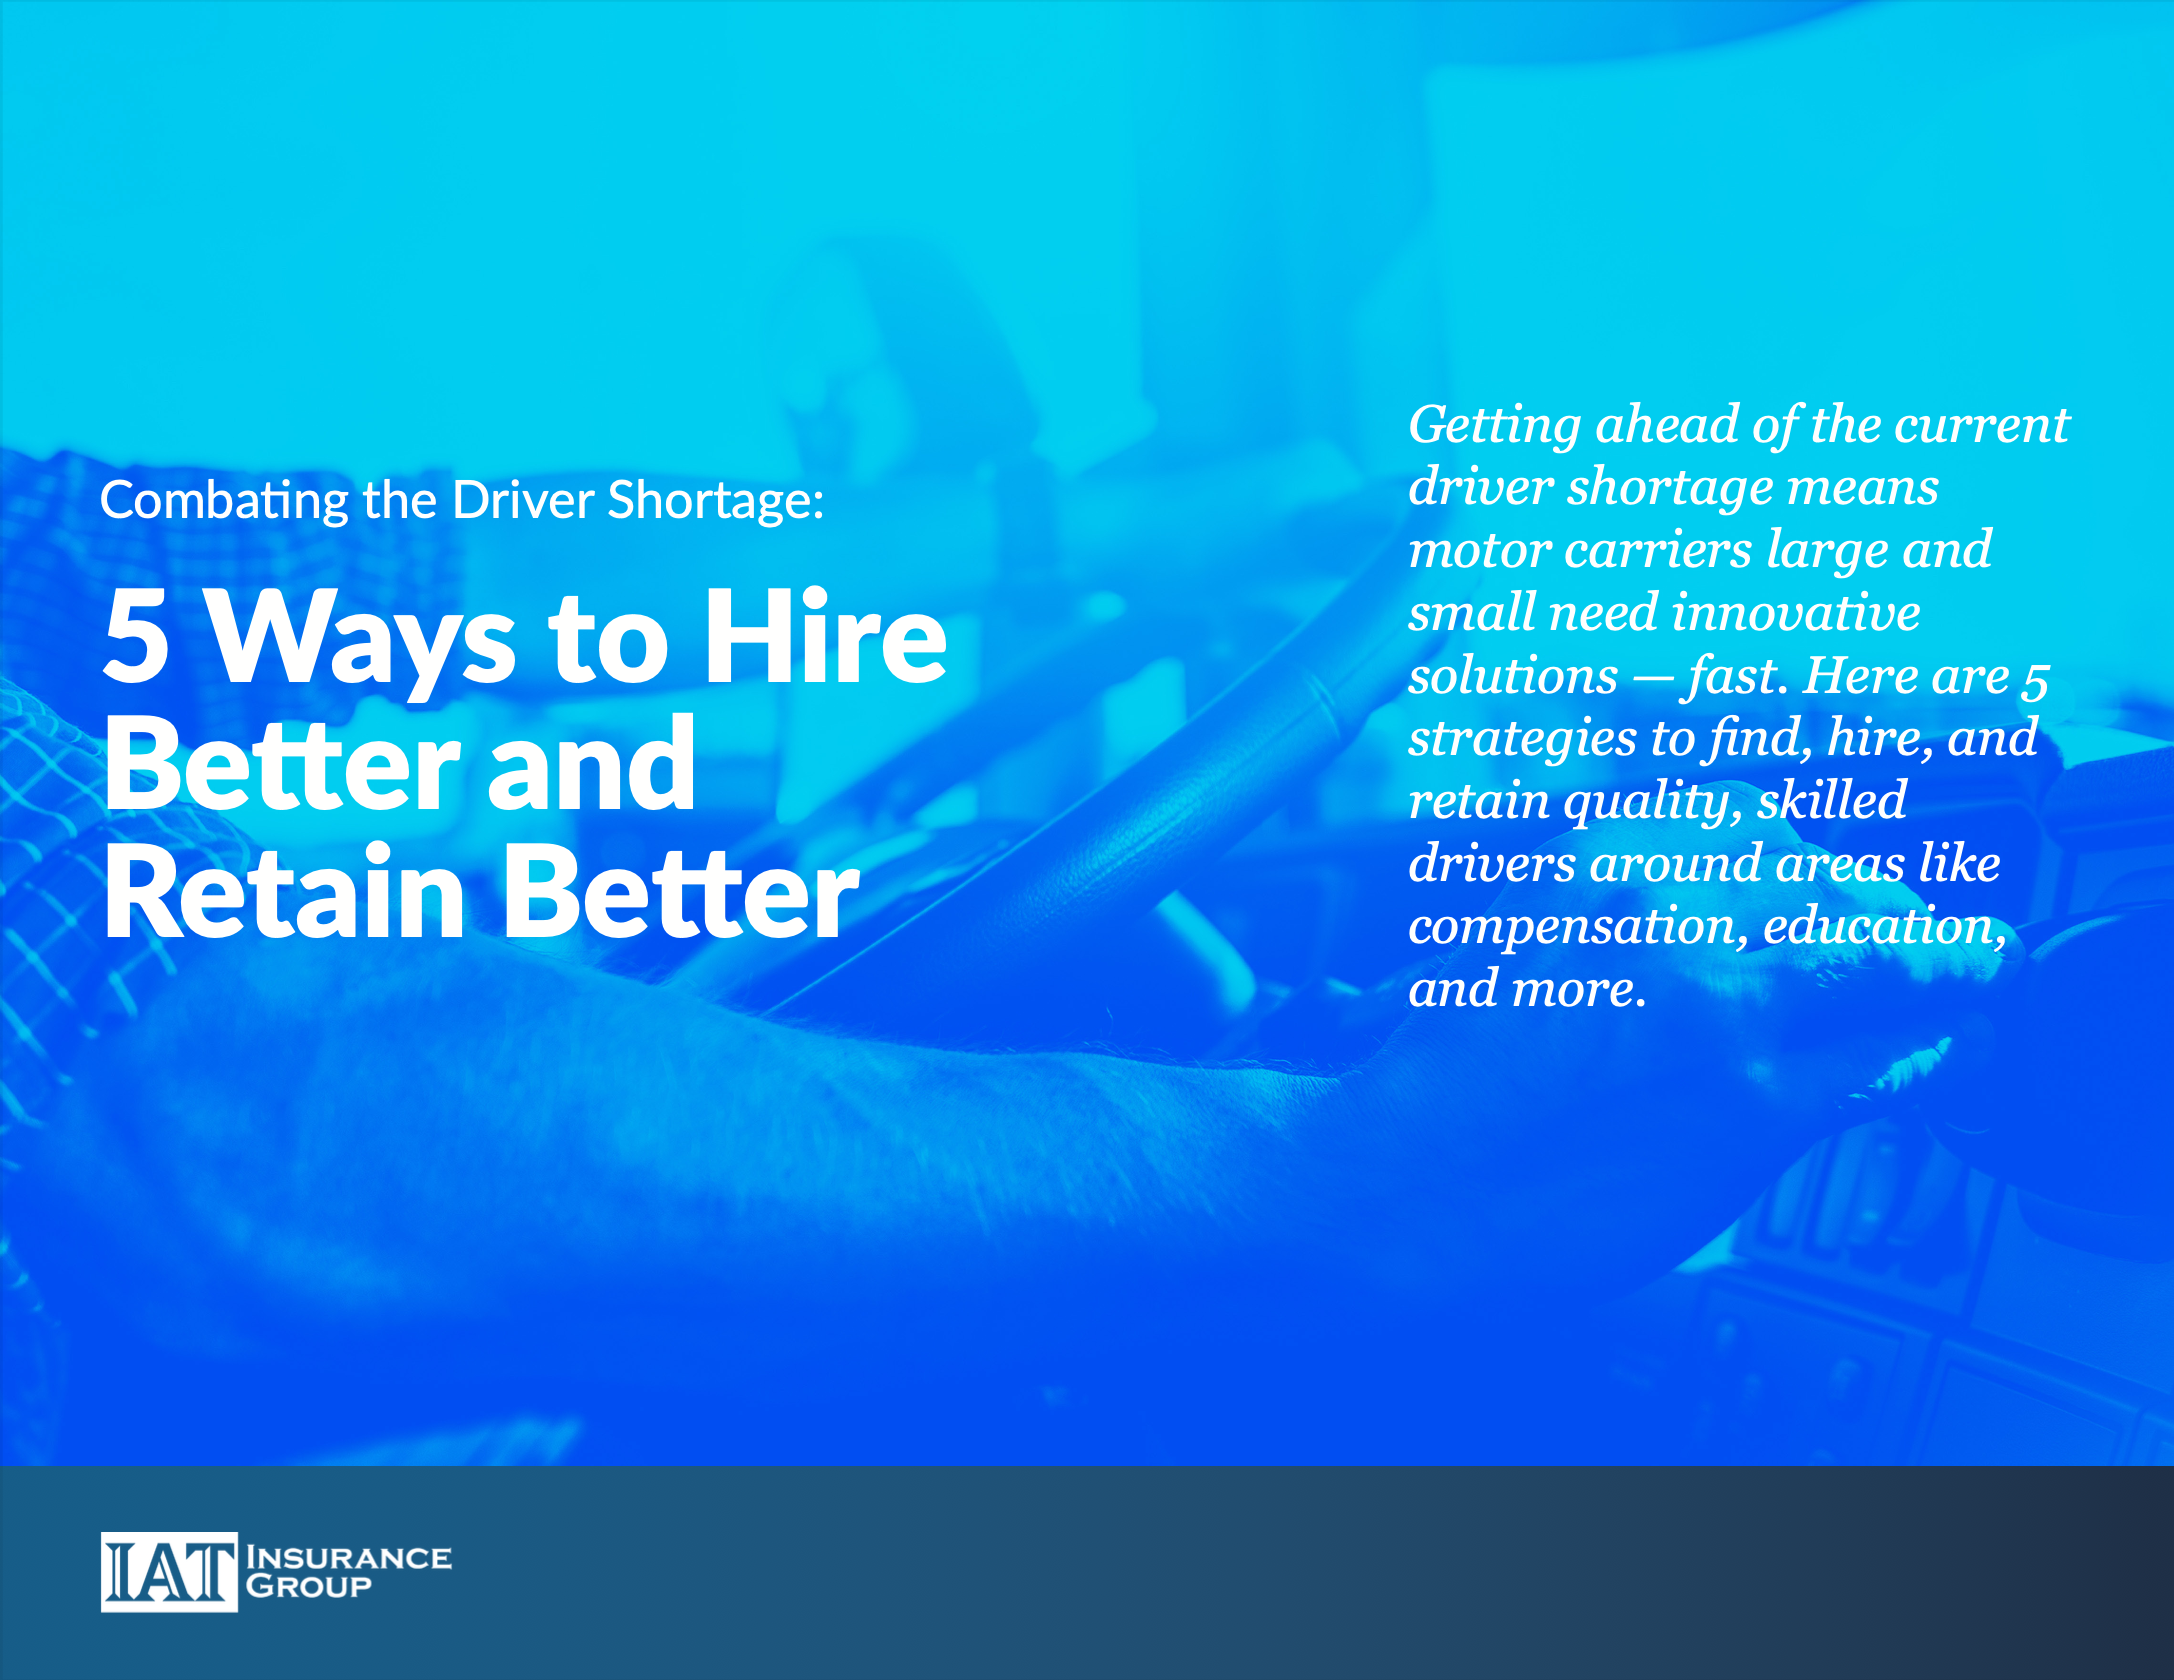 5 Ways to Hire Better and Retain Better